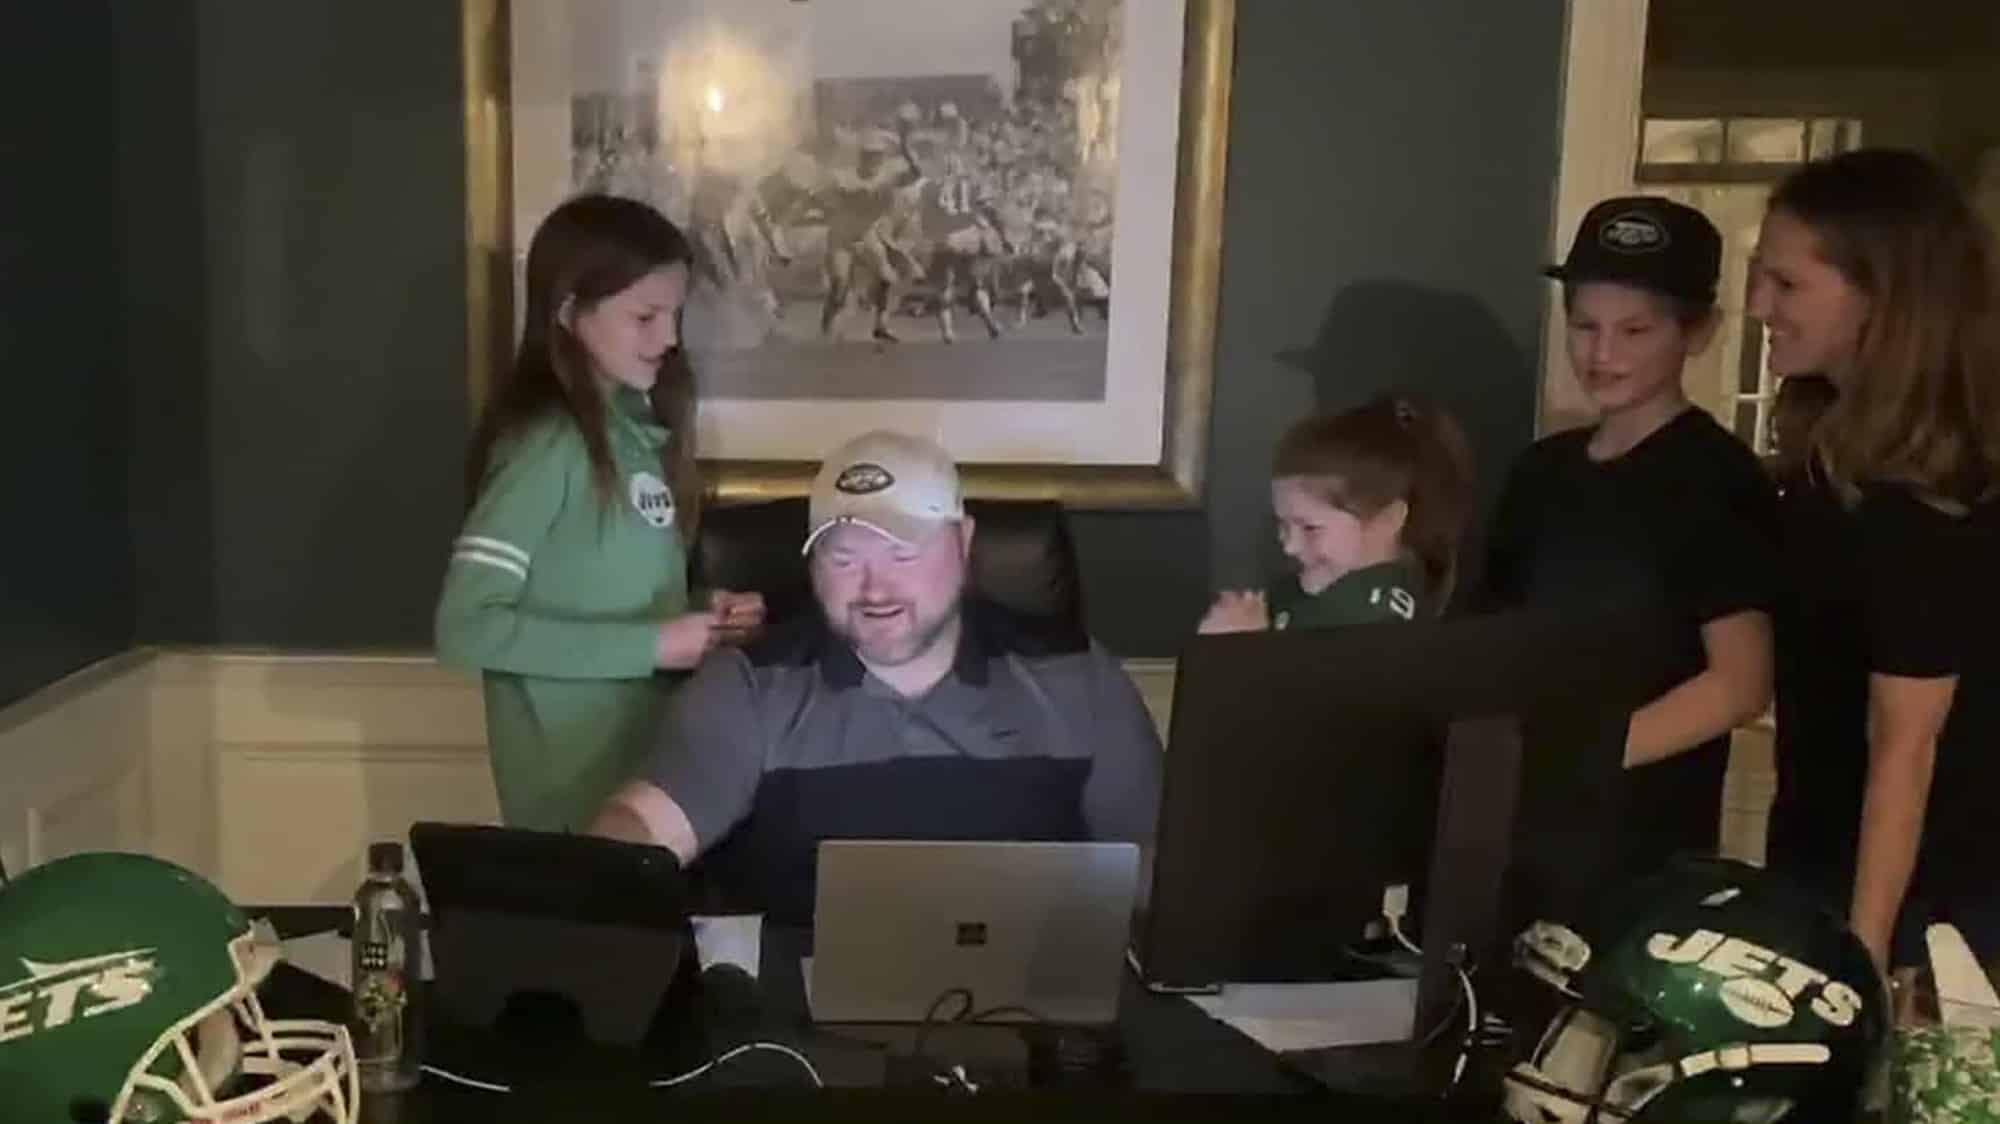 UNSPECIFIED LOCATION - APRIL 24: (EDITORIAL USE ONLY) In this still image from video provided by the NFL, New York Jets general manager Joe Douglas, seated, works during the second round of the 2020 NFL Draft on April 24, 2020.